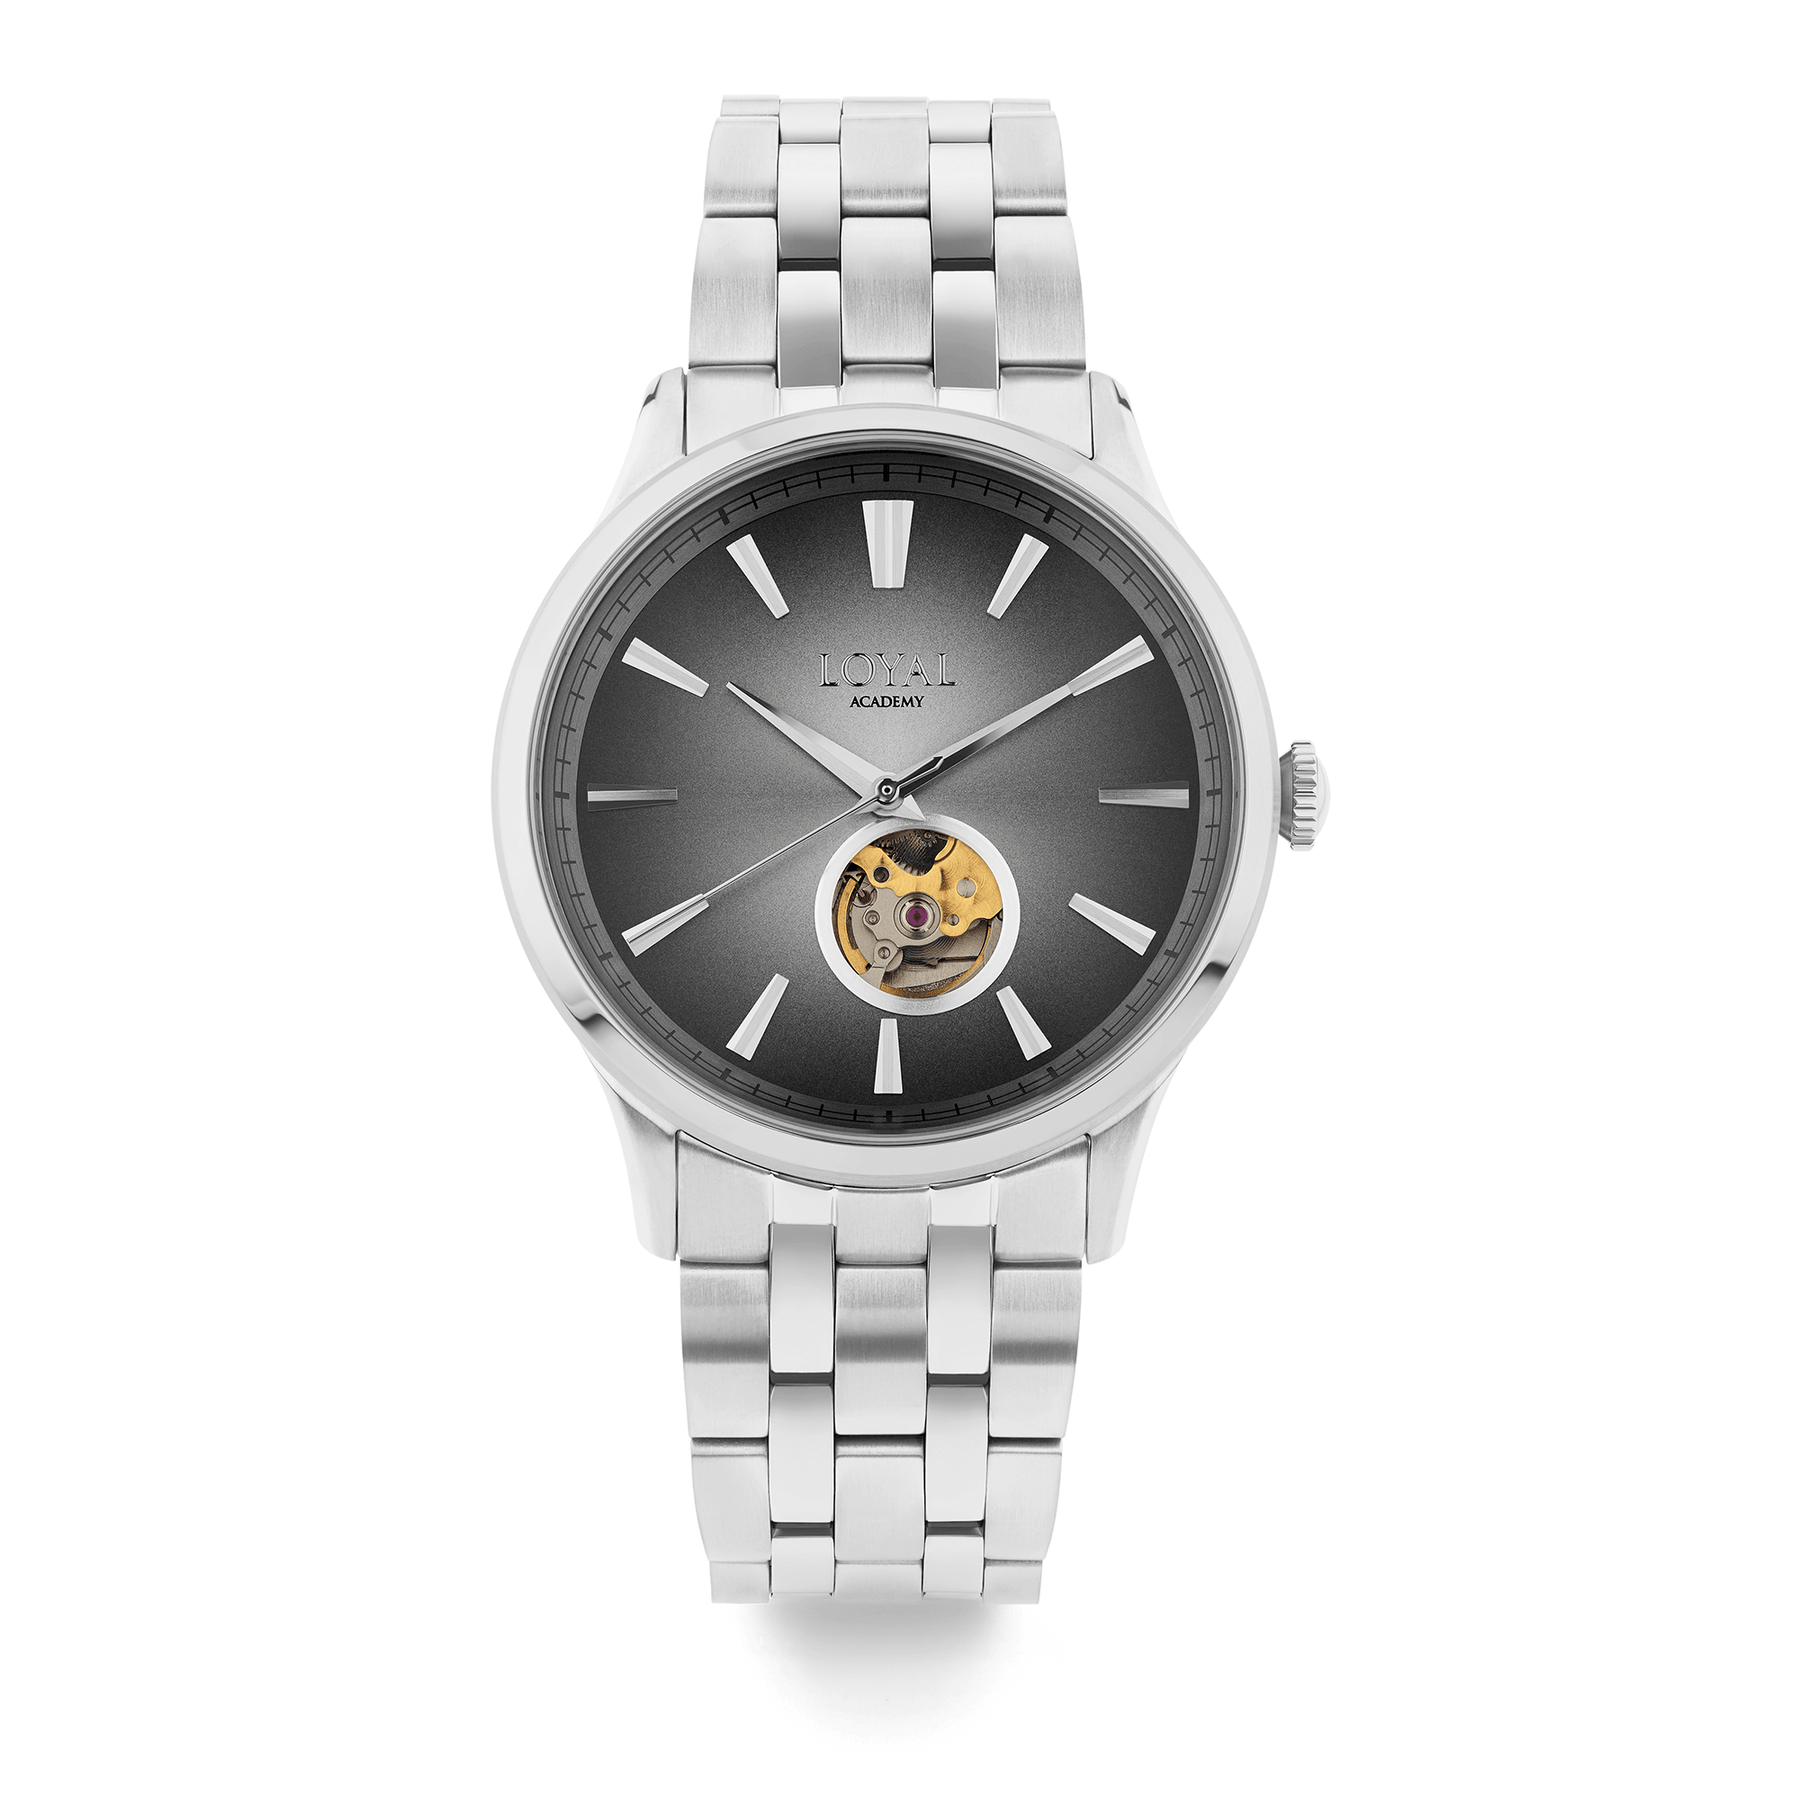 Loyal Academy Men's 42.20mm Stainless Steel Automatic Watch - Wallace Bishop